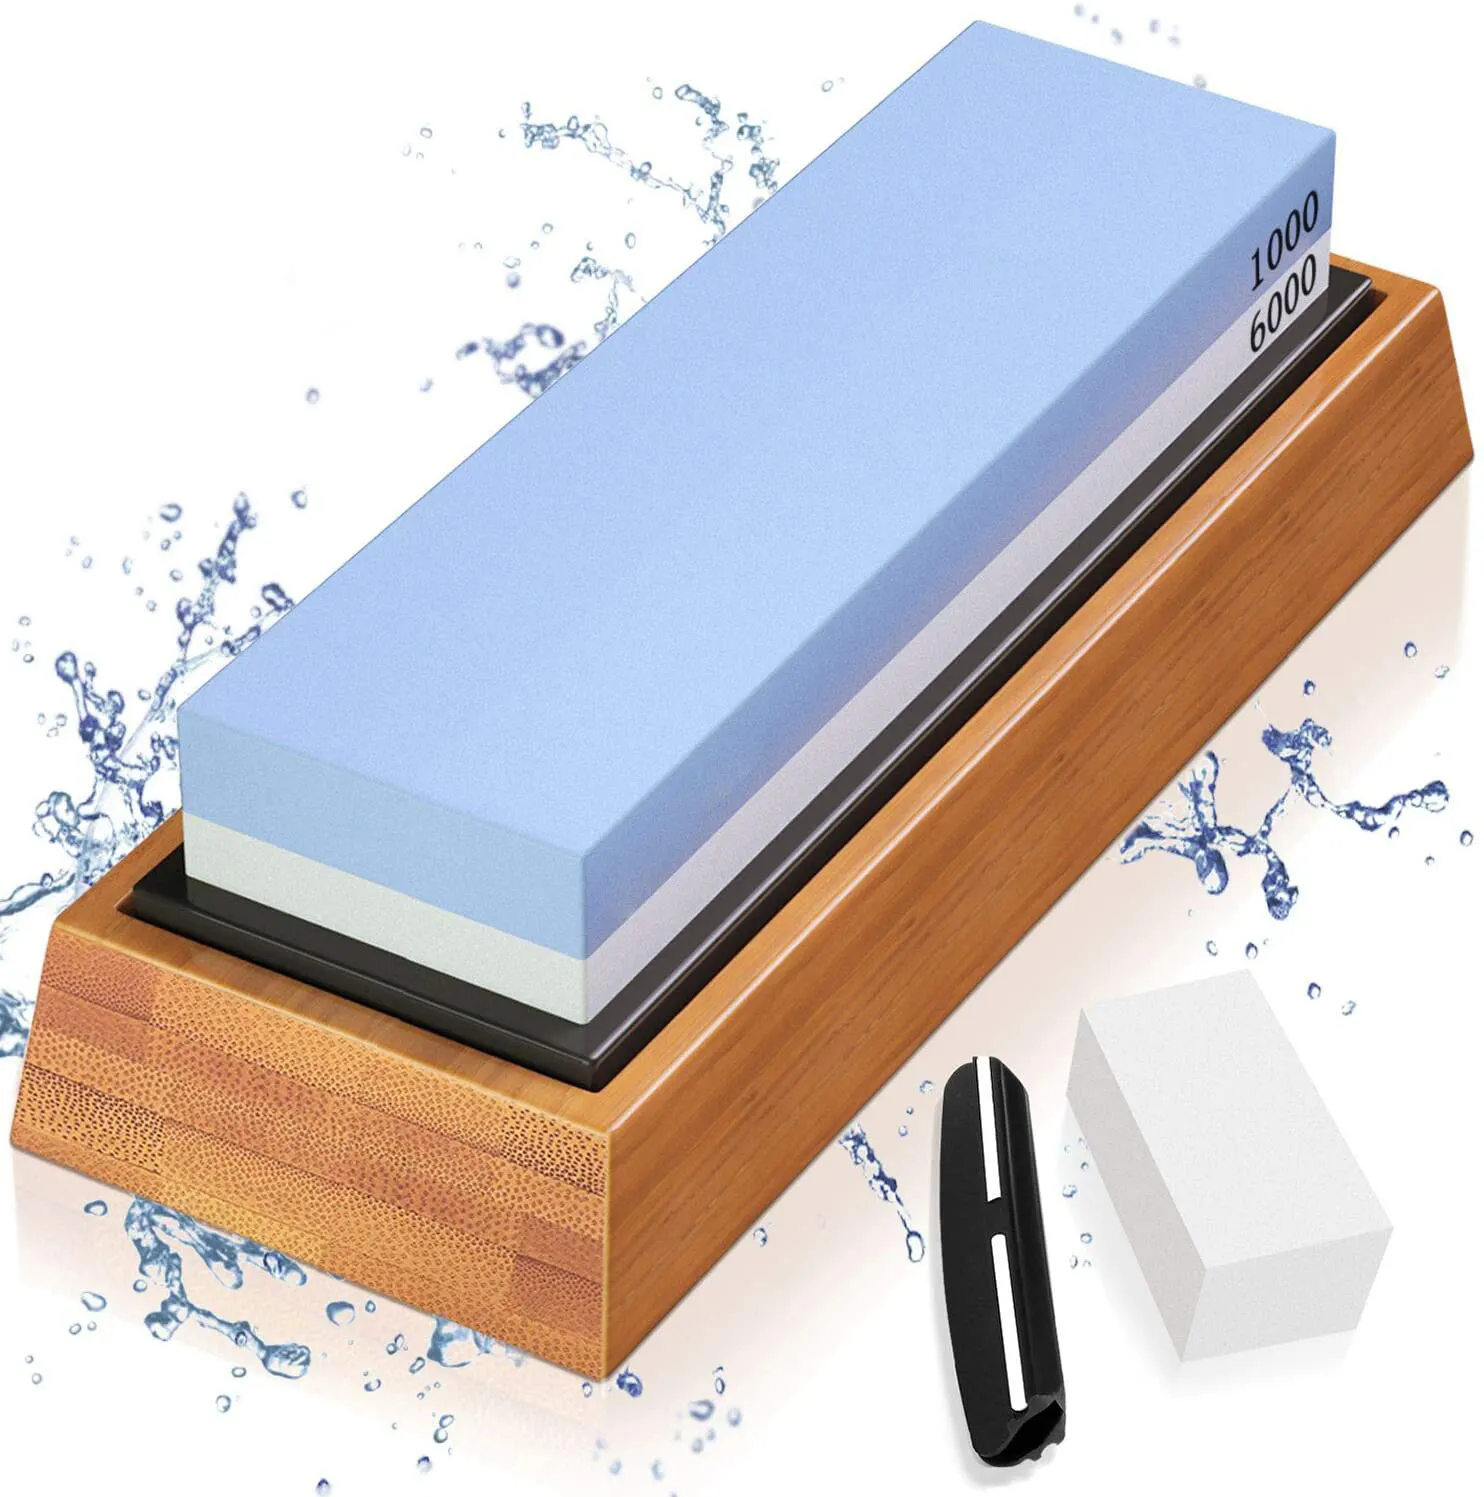 Knife Sharpening Stone Dual Side Grit 1000/6000 with Nonslip Bamboo Base and best seller sharpeners